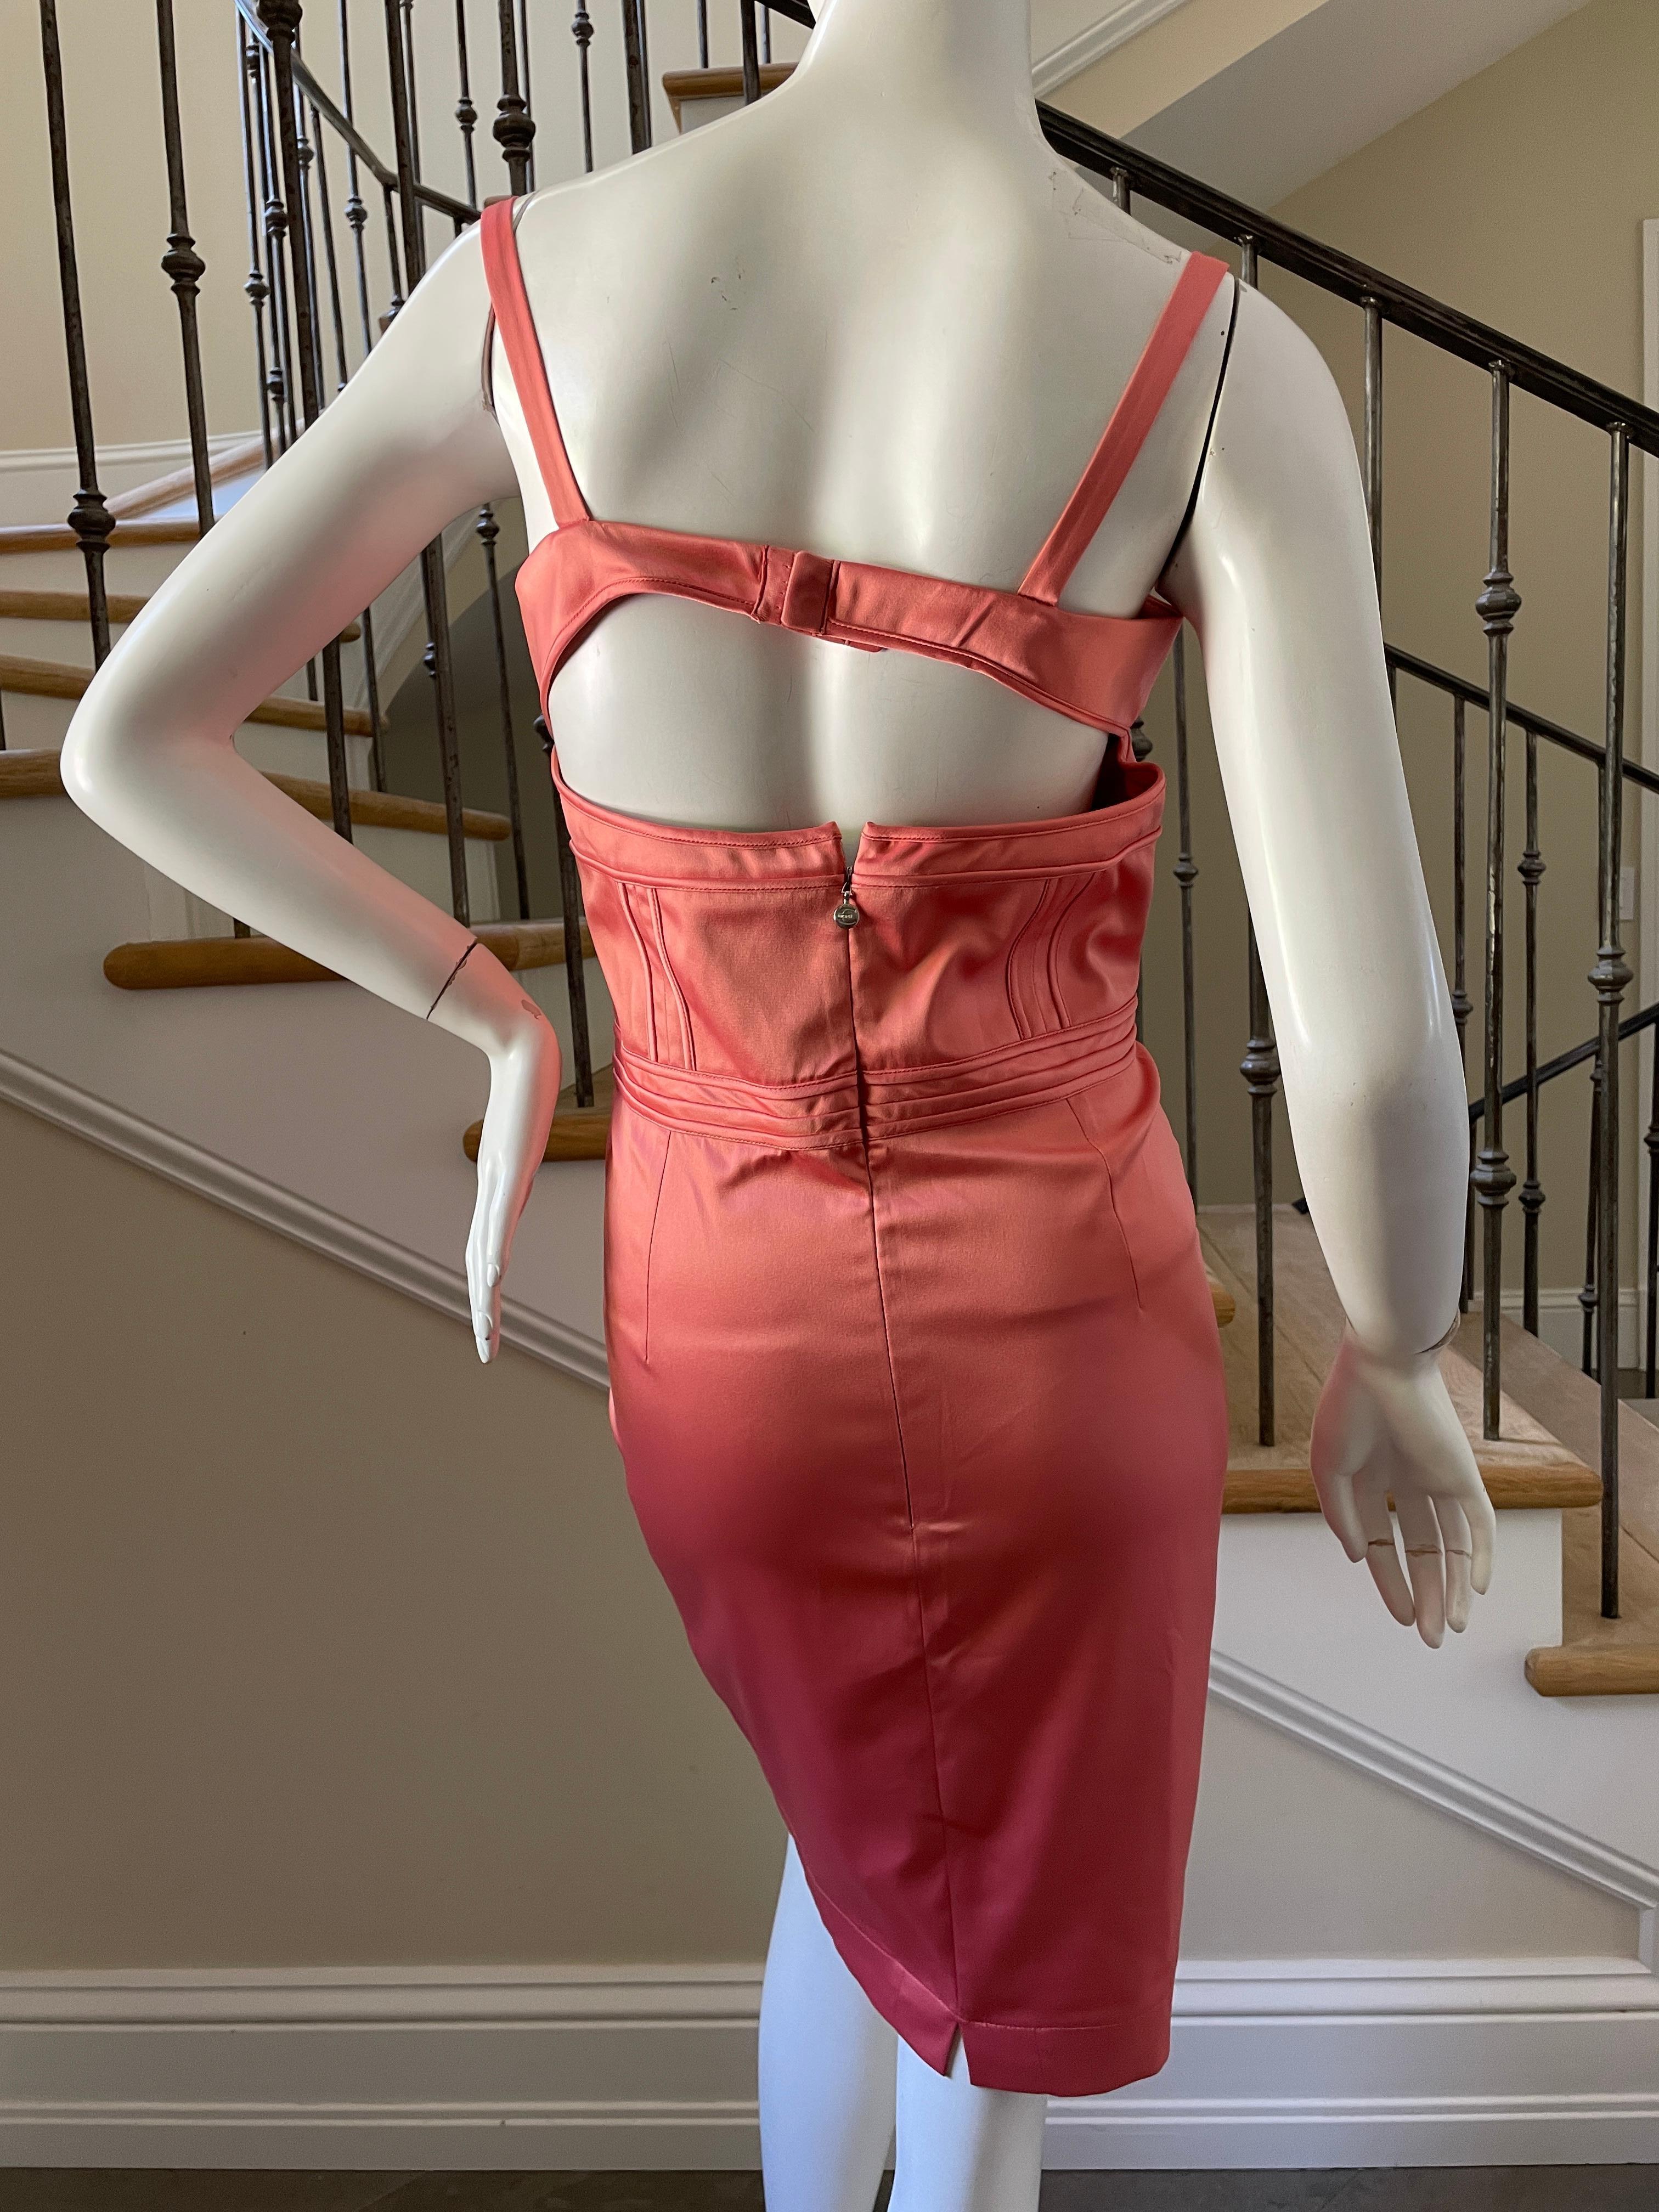 Just Cavalli Sexy Pink Corset Cocktail Dress by Roberto Cavalli For Sale 1